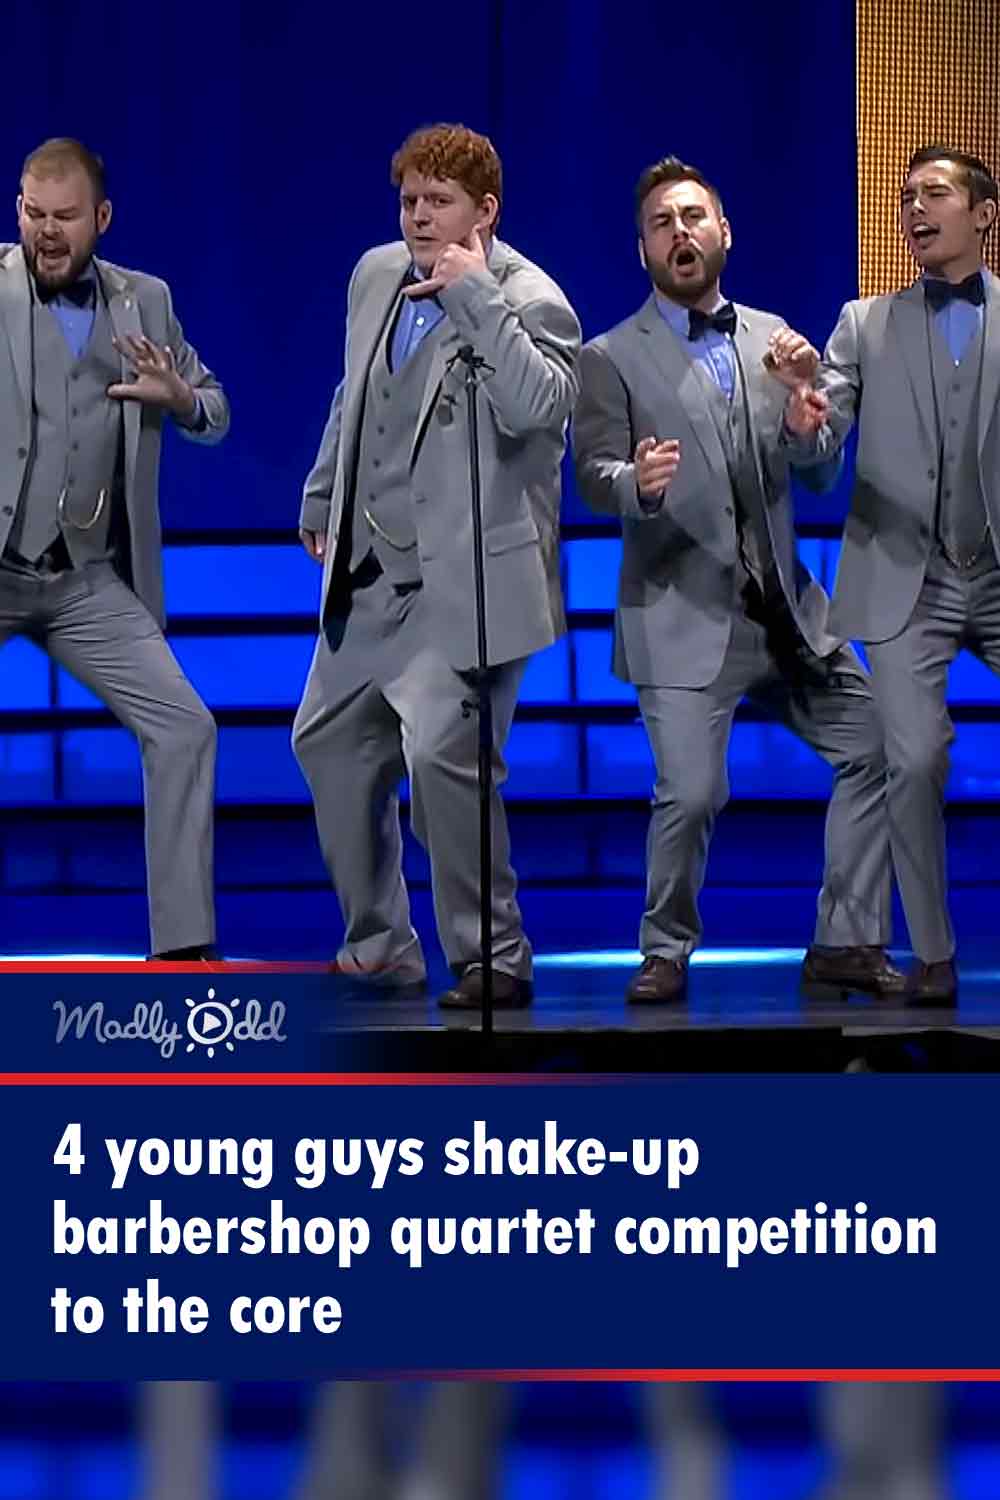 4 young guys shake-up barbershop quartet competition to the core